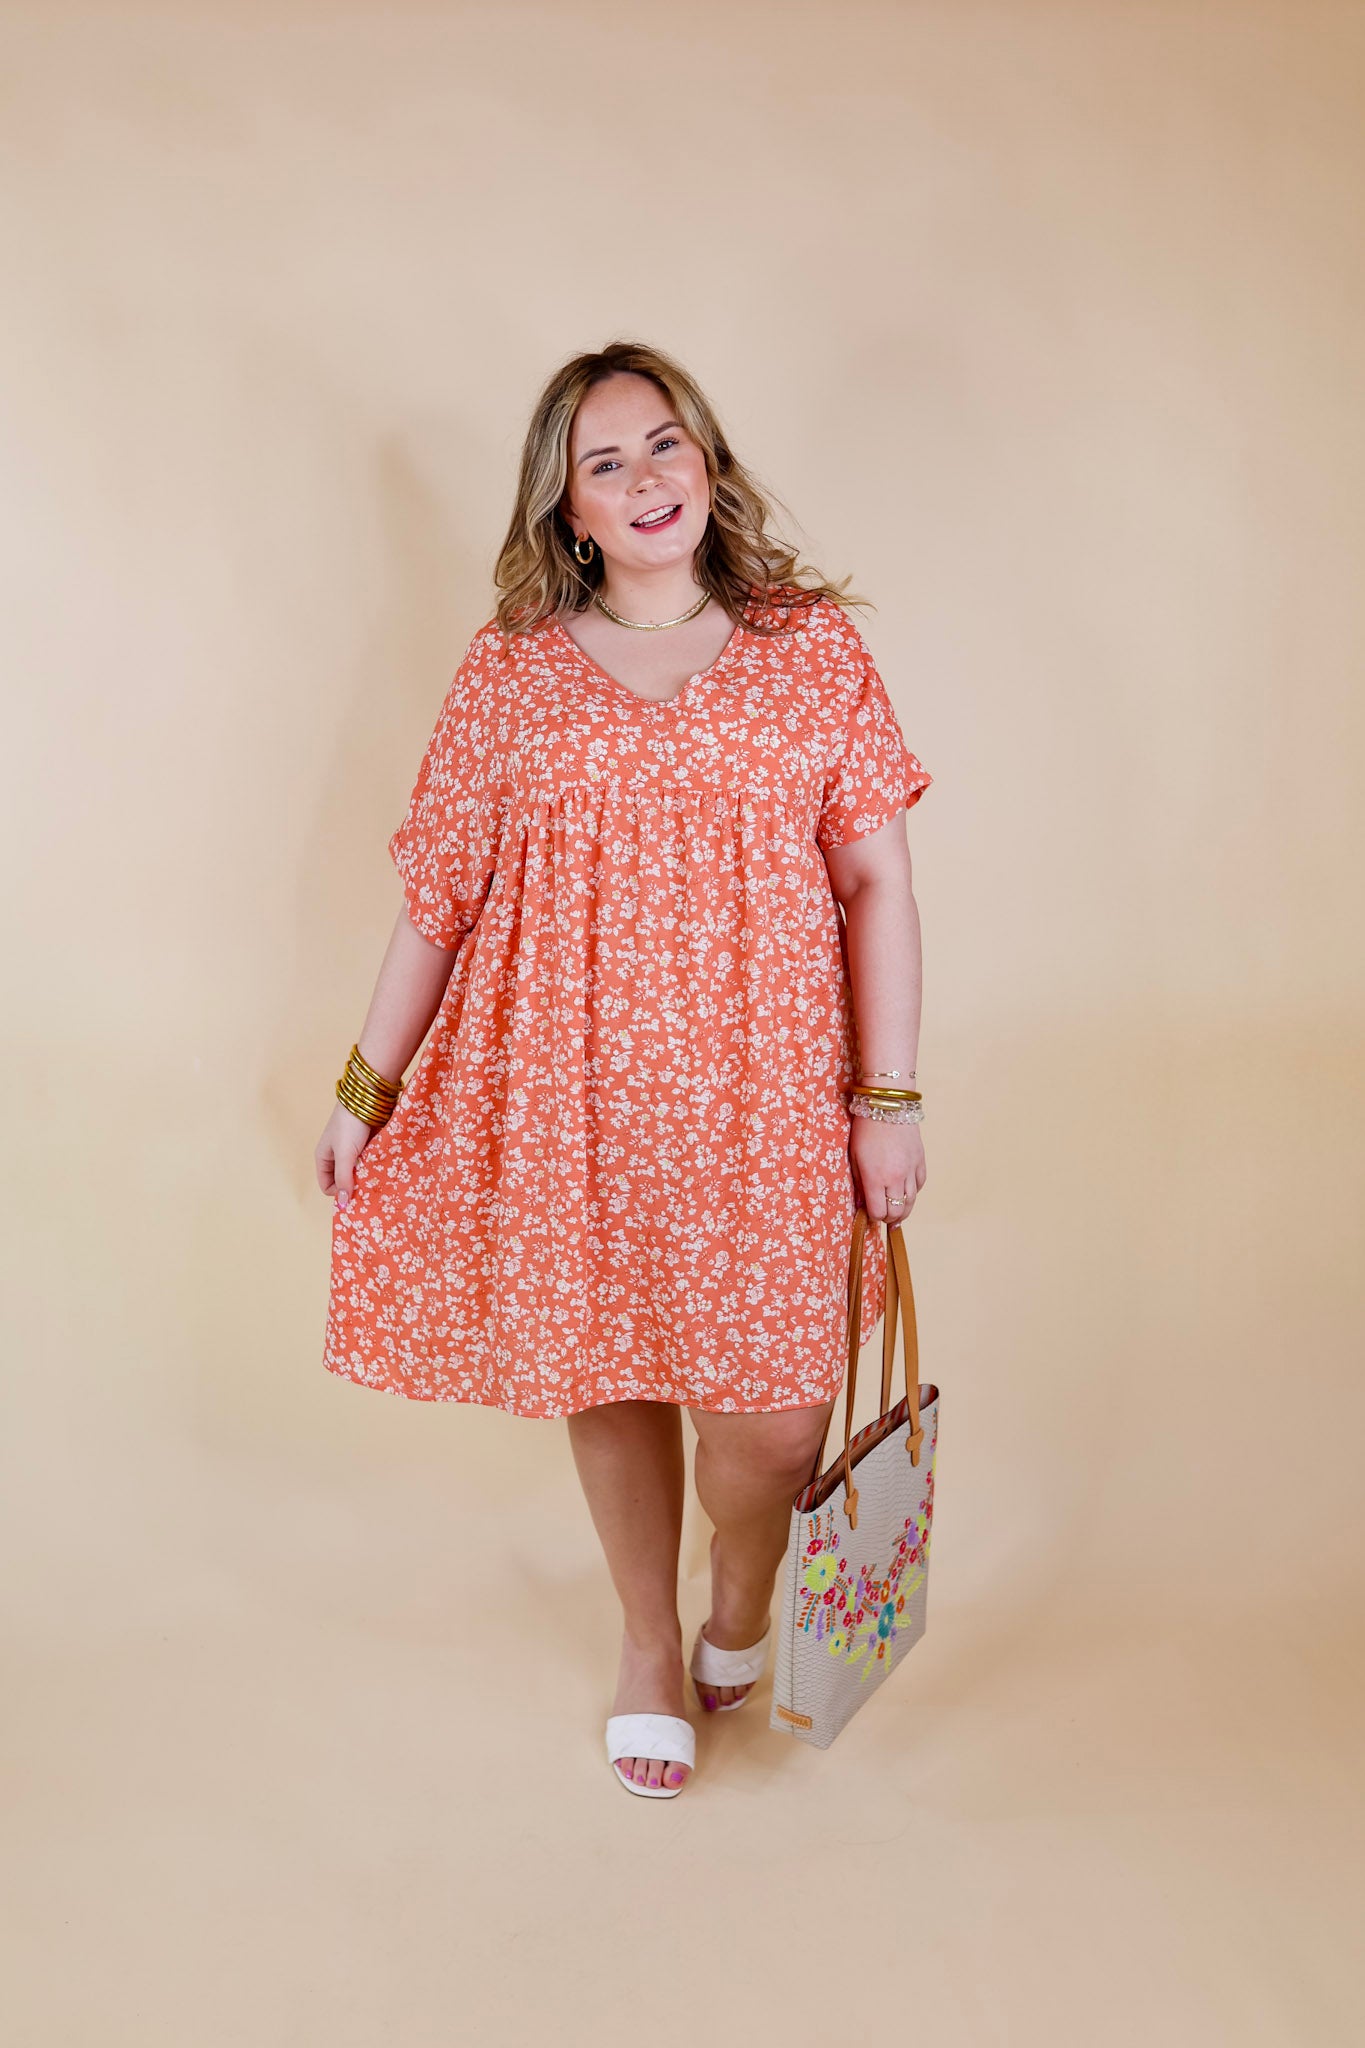 Beauty In Blooms Floral Print Babydoll Dress in Coral Orange - Giddy Up Glamour Boutique